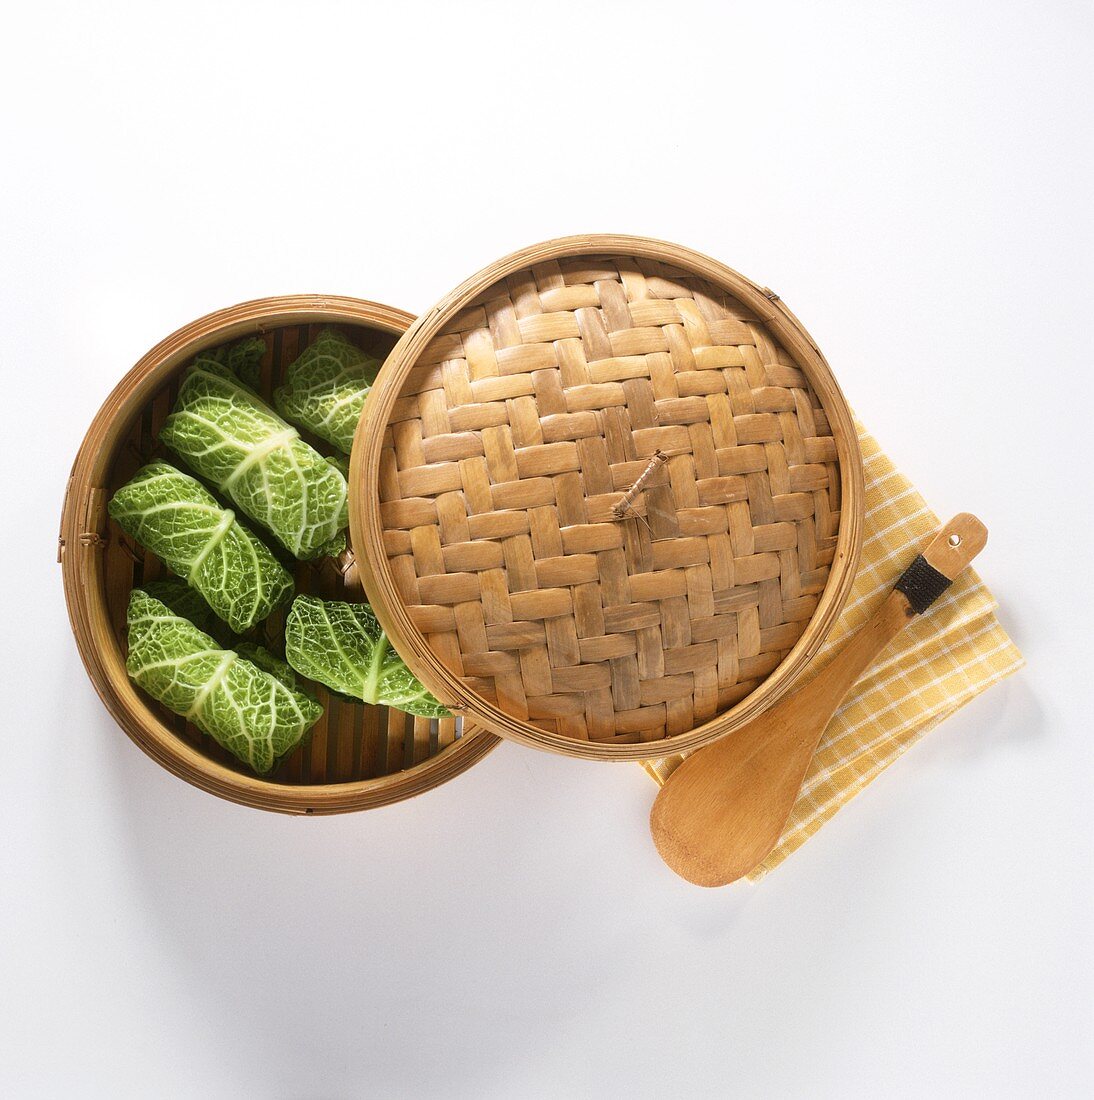 Asian steaming basket with savoy rolls, napkin